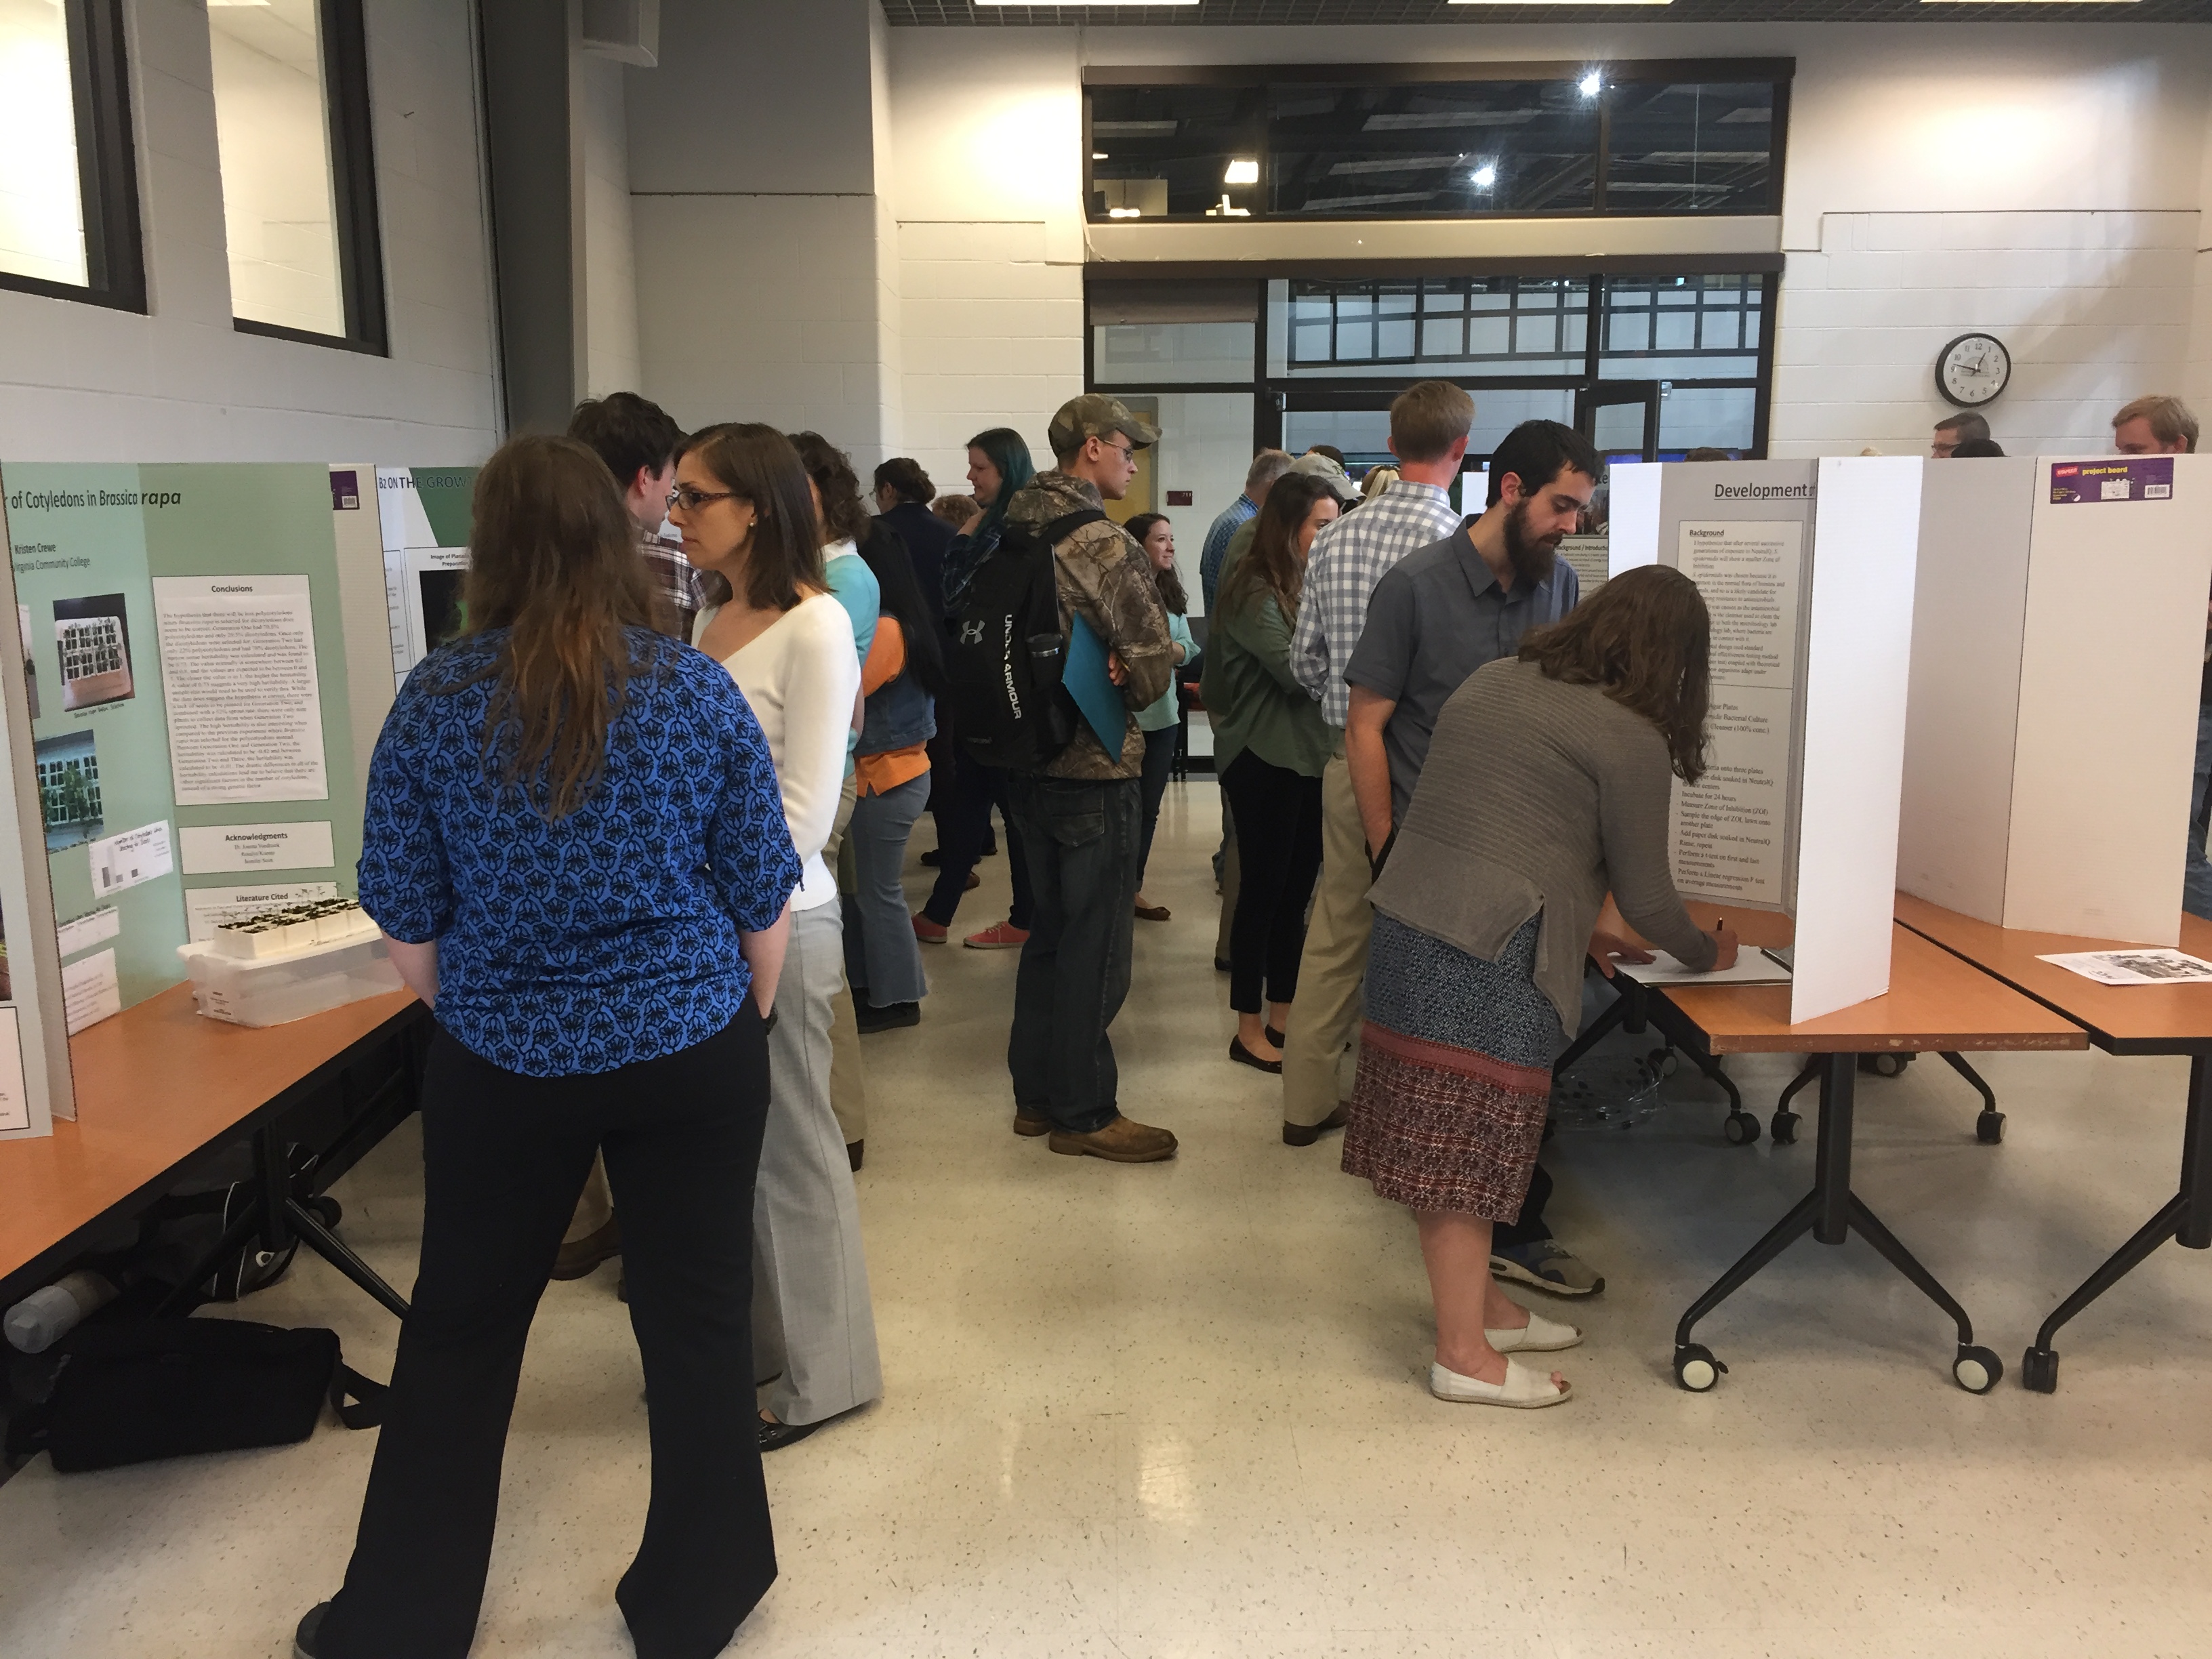 Students and faculty look at posters on tables in the North Mall Meeting Room.